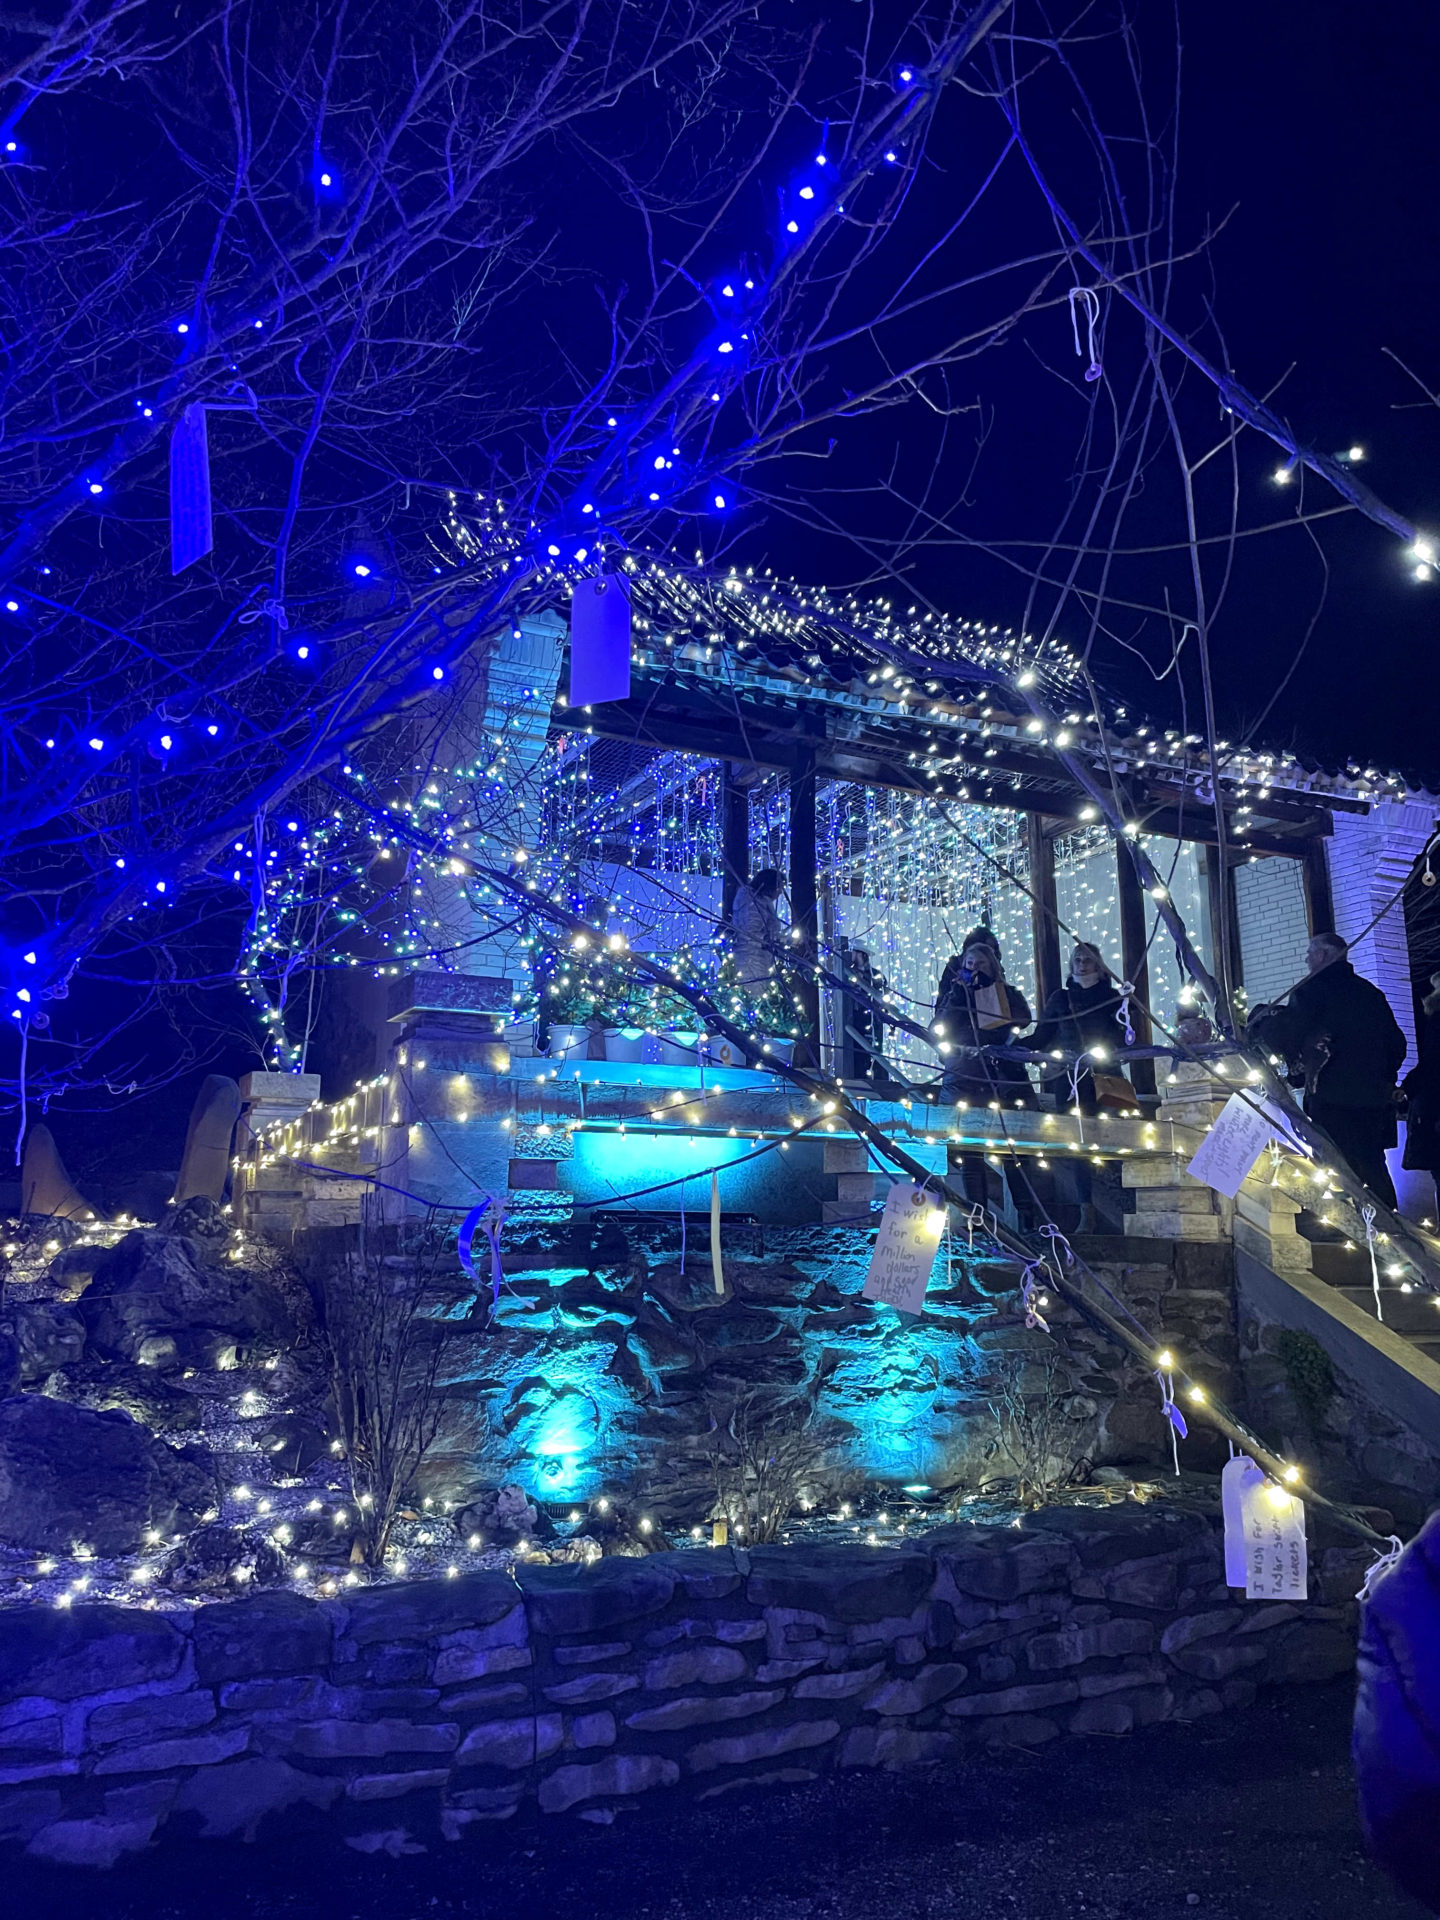 The Chinese garden gleams in blue and silver at Winterlights at Naumkeag.